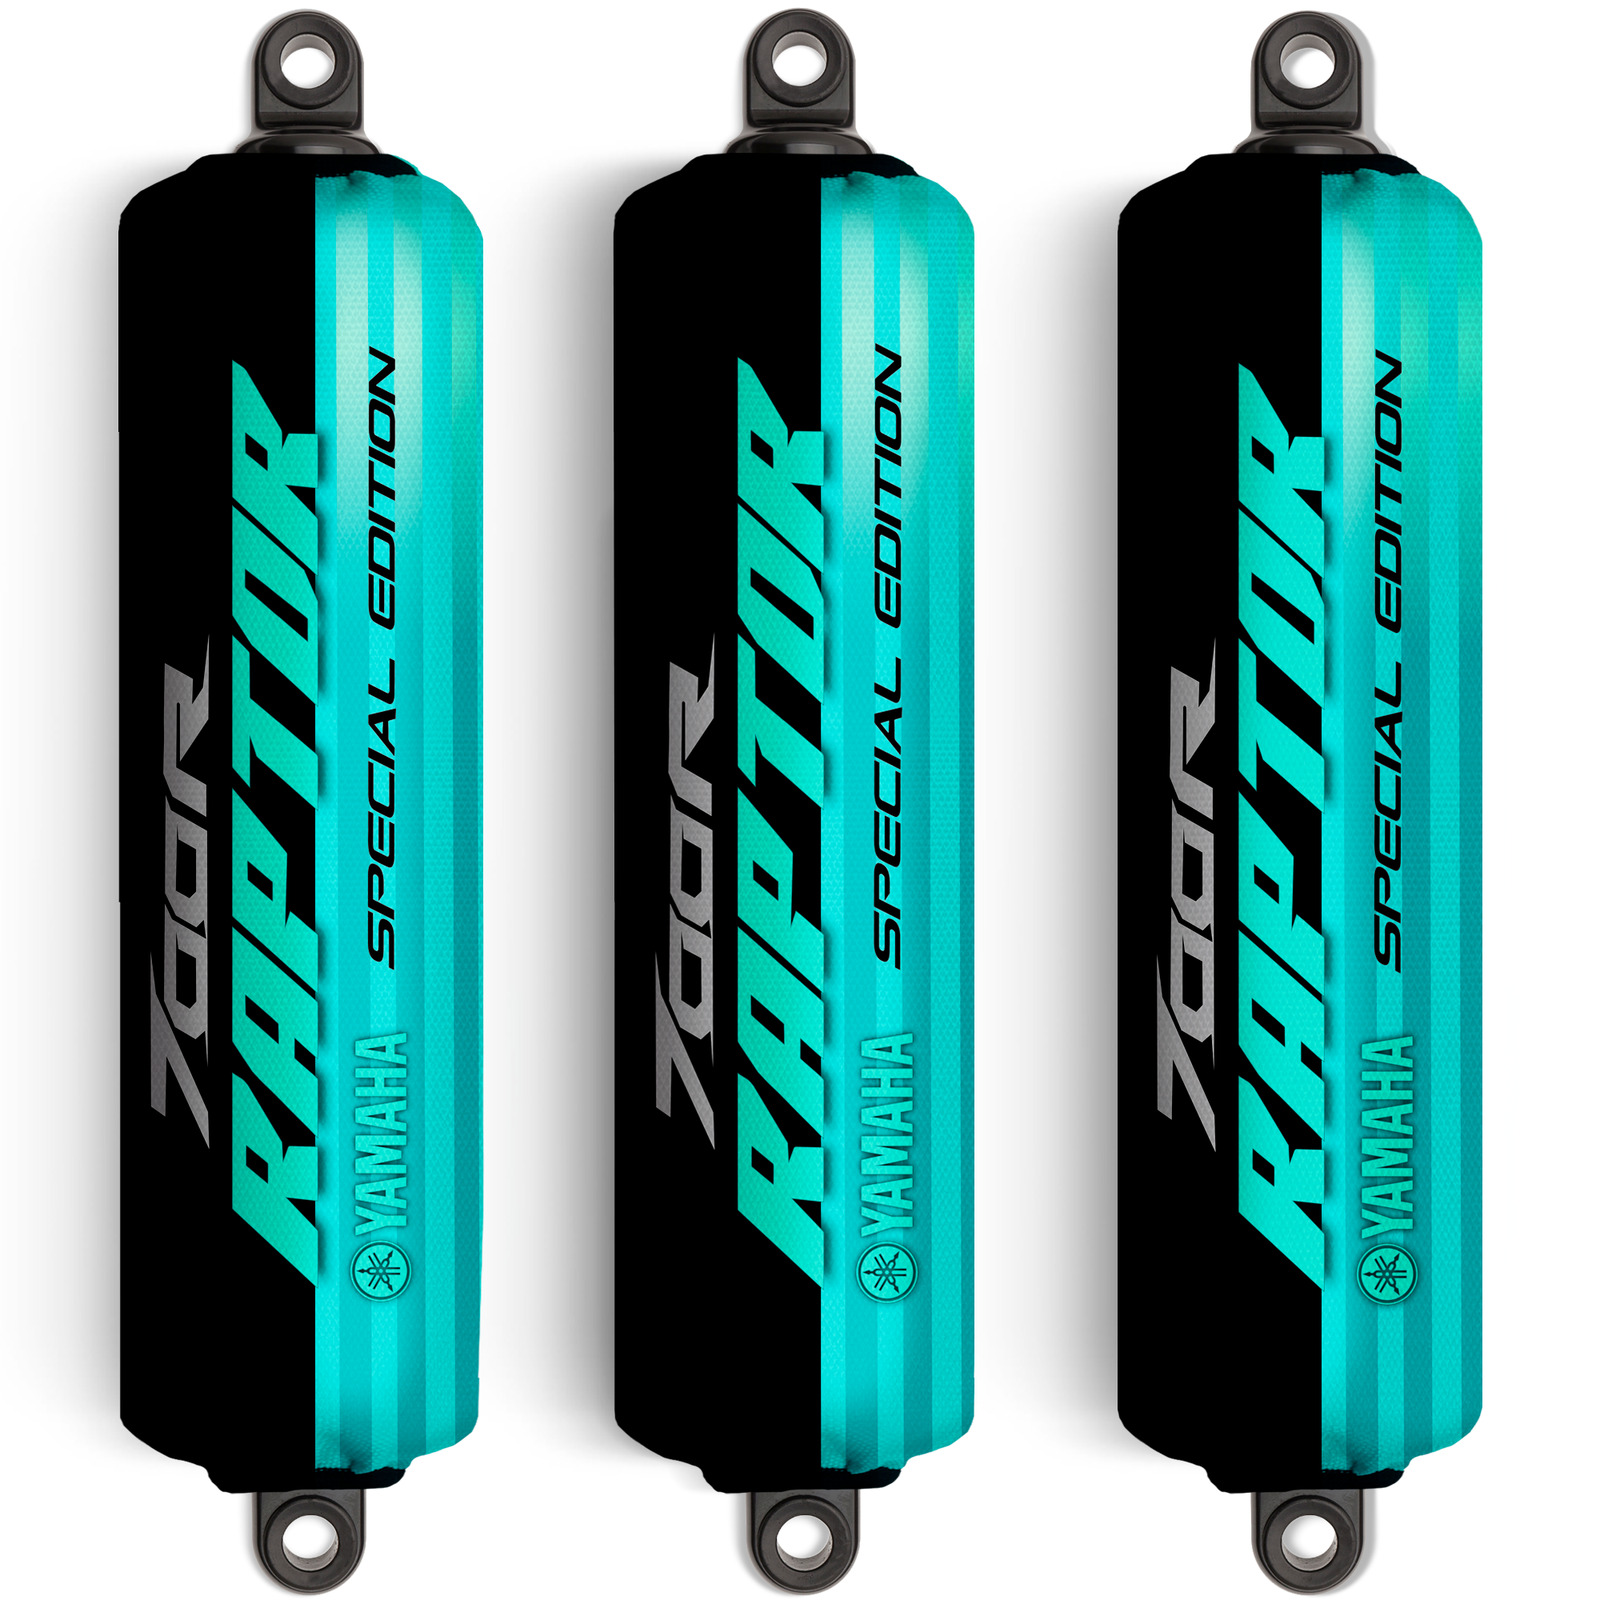 Turquoise & Black Shock Covers for Yamaha Raptor YFM700R [Special Edition]